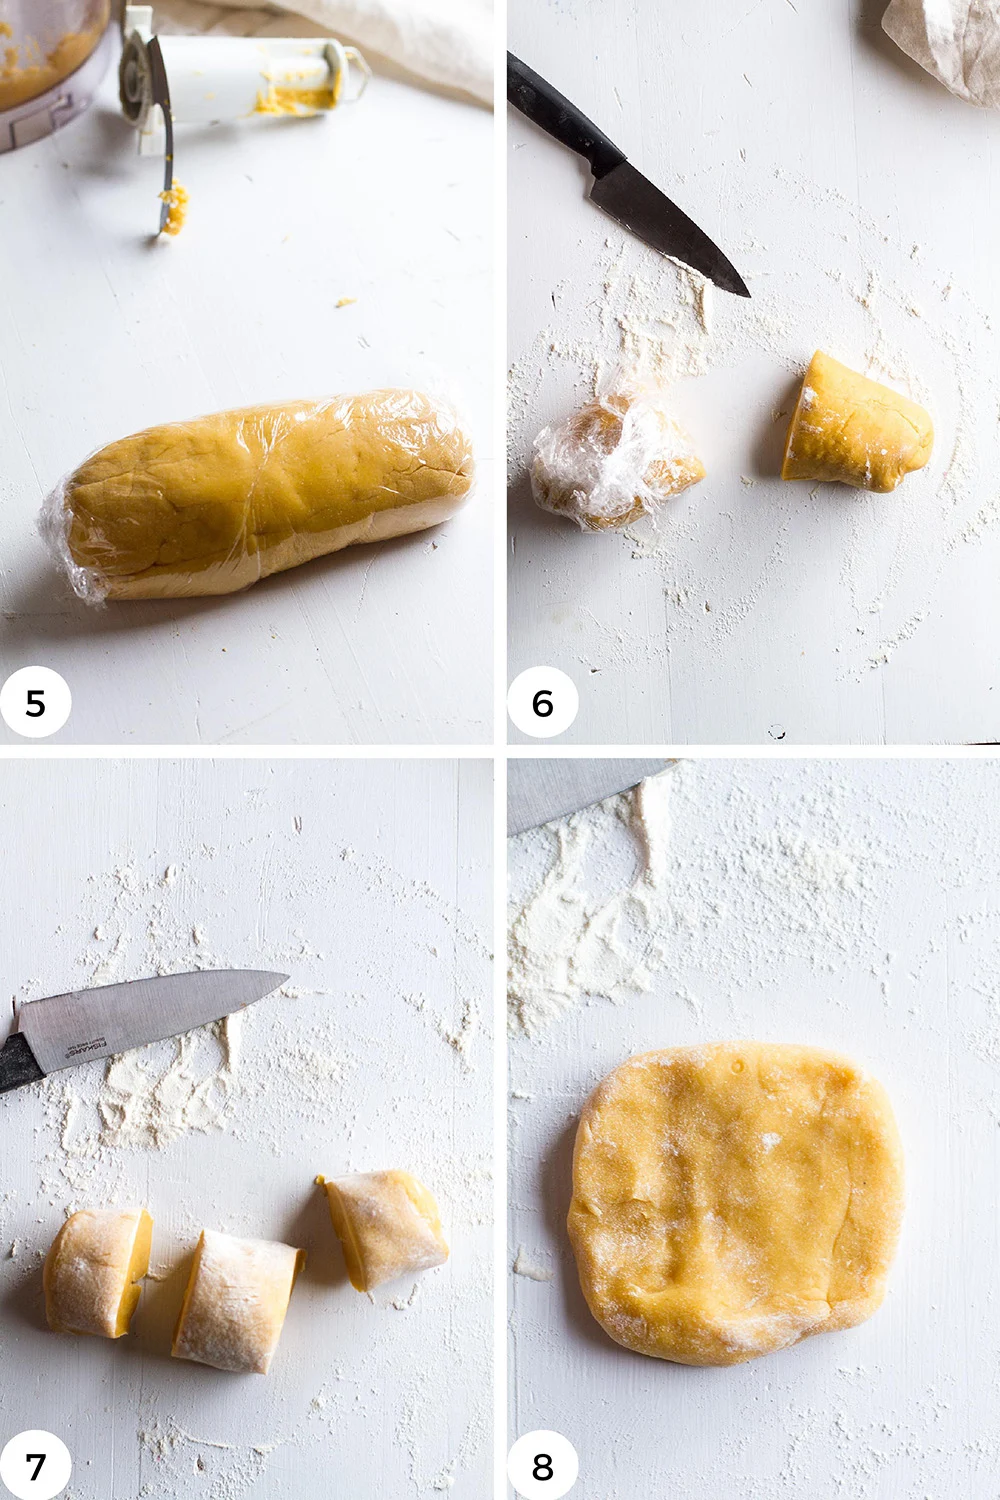 Steps to shape the pasta discs.